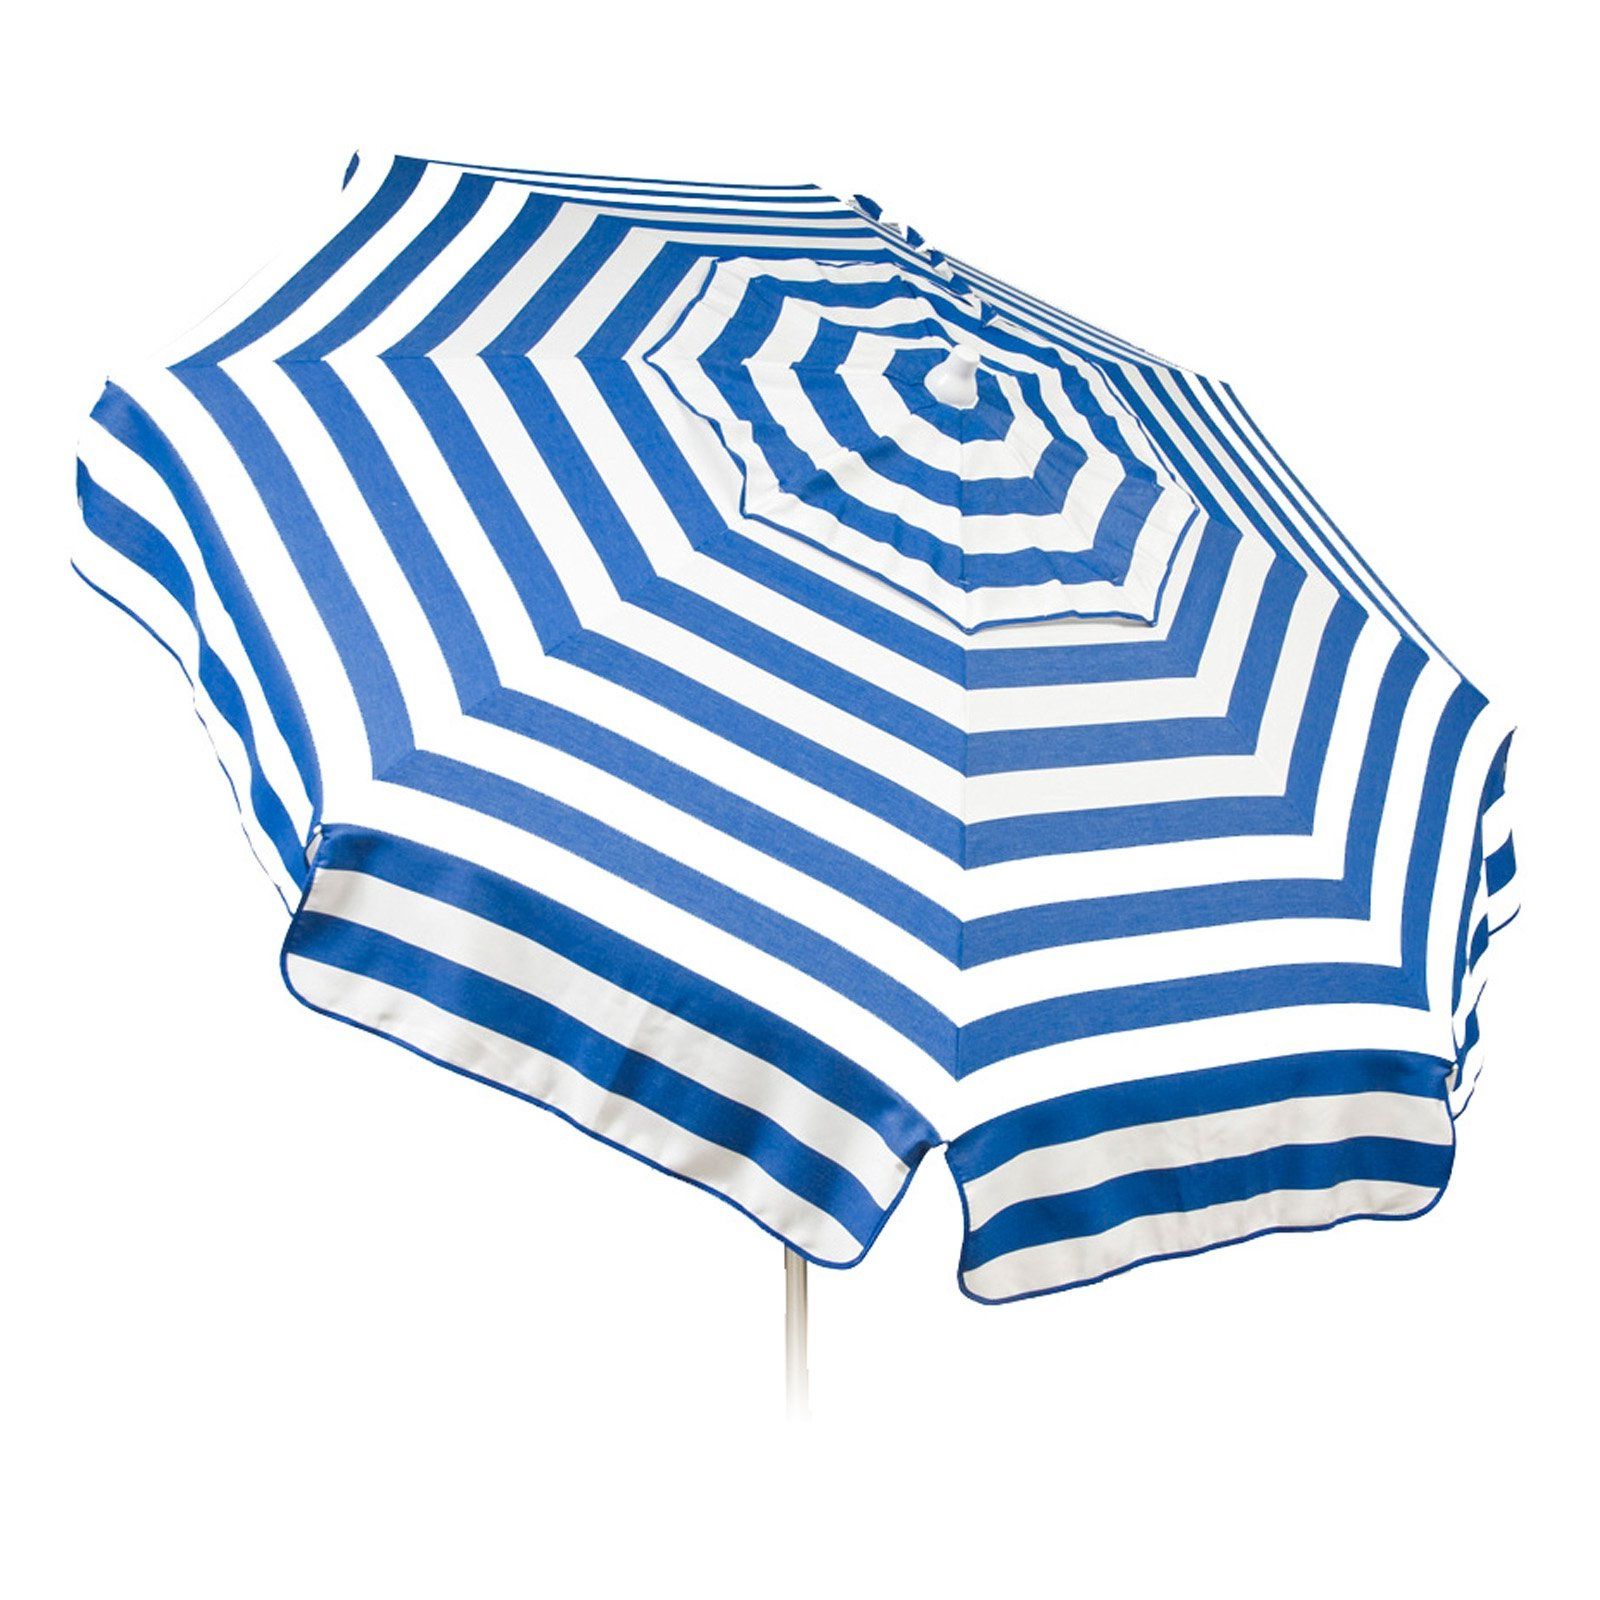 Newest Deals Only – Shop For Outdoor, Home, And Toy Products With Italian Market Umbrellas (View 7 of 20)